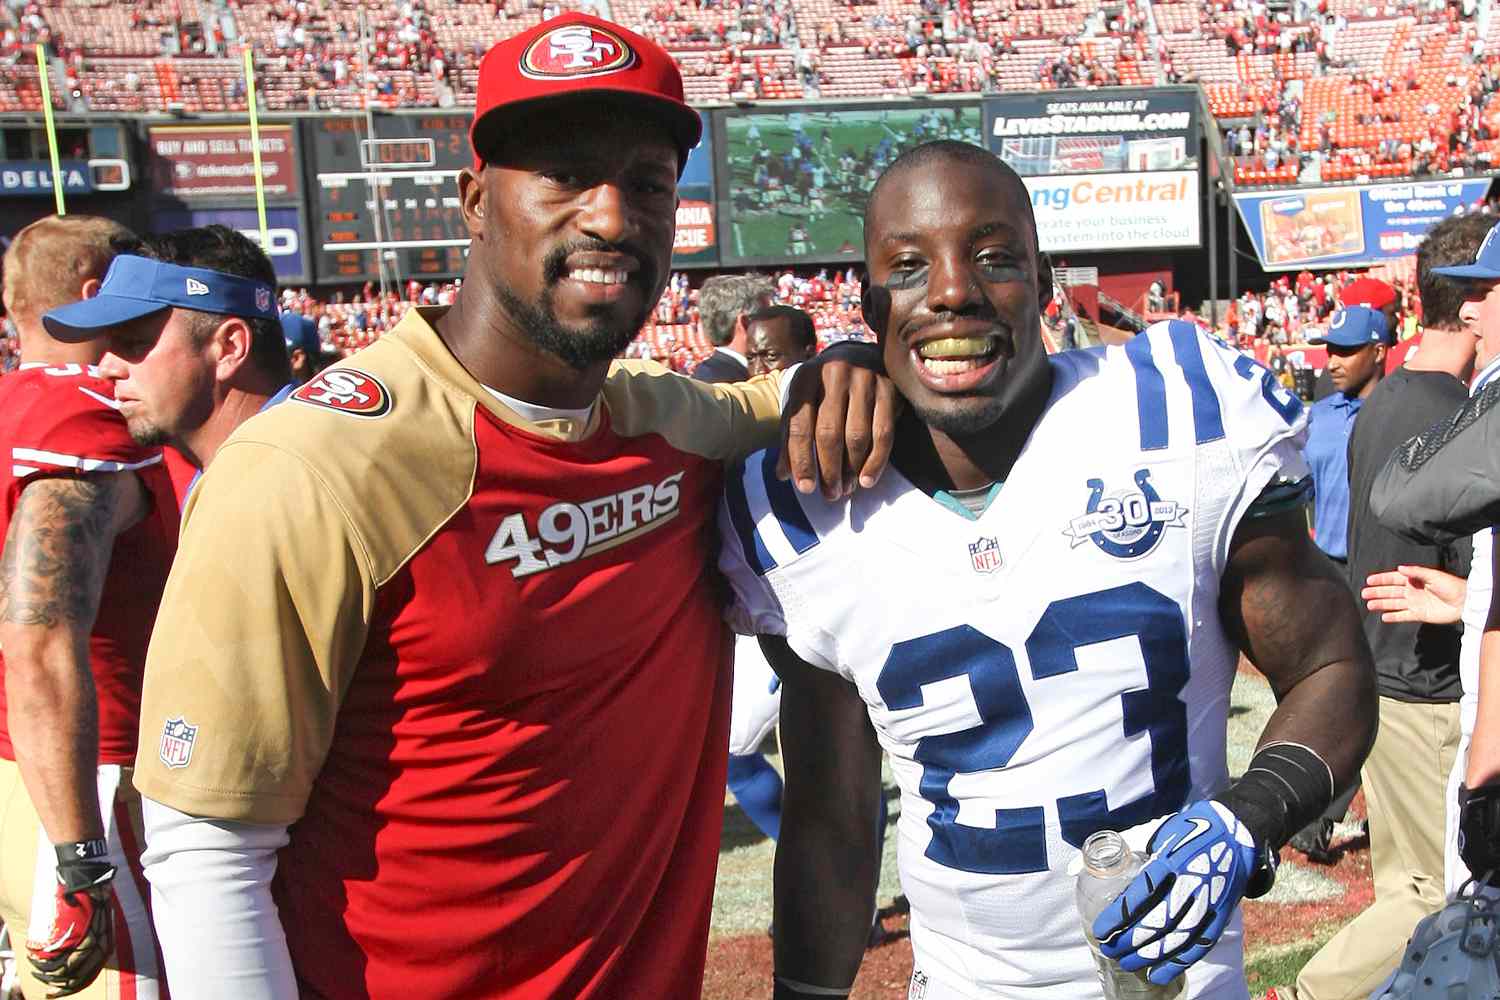 Vernon Davis #85 of the San Francisco 49ers stands with his brother Vontae Davis #23 of the Indianapolis Colts following the game at Candlestick Park on September 22, 2013 in San Francisco, California. The Colts defeated the 49ers 27-7.